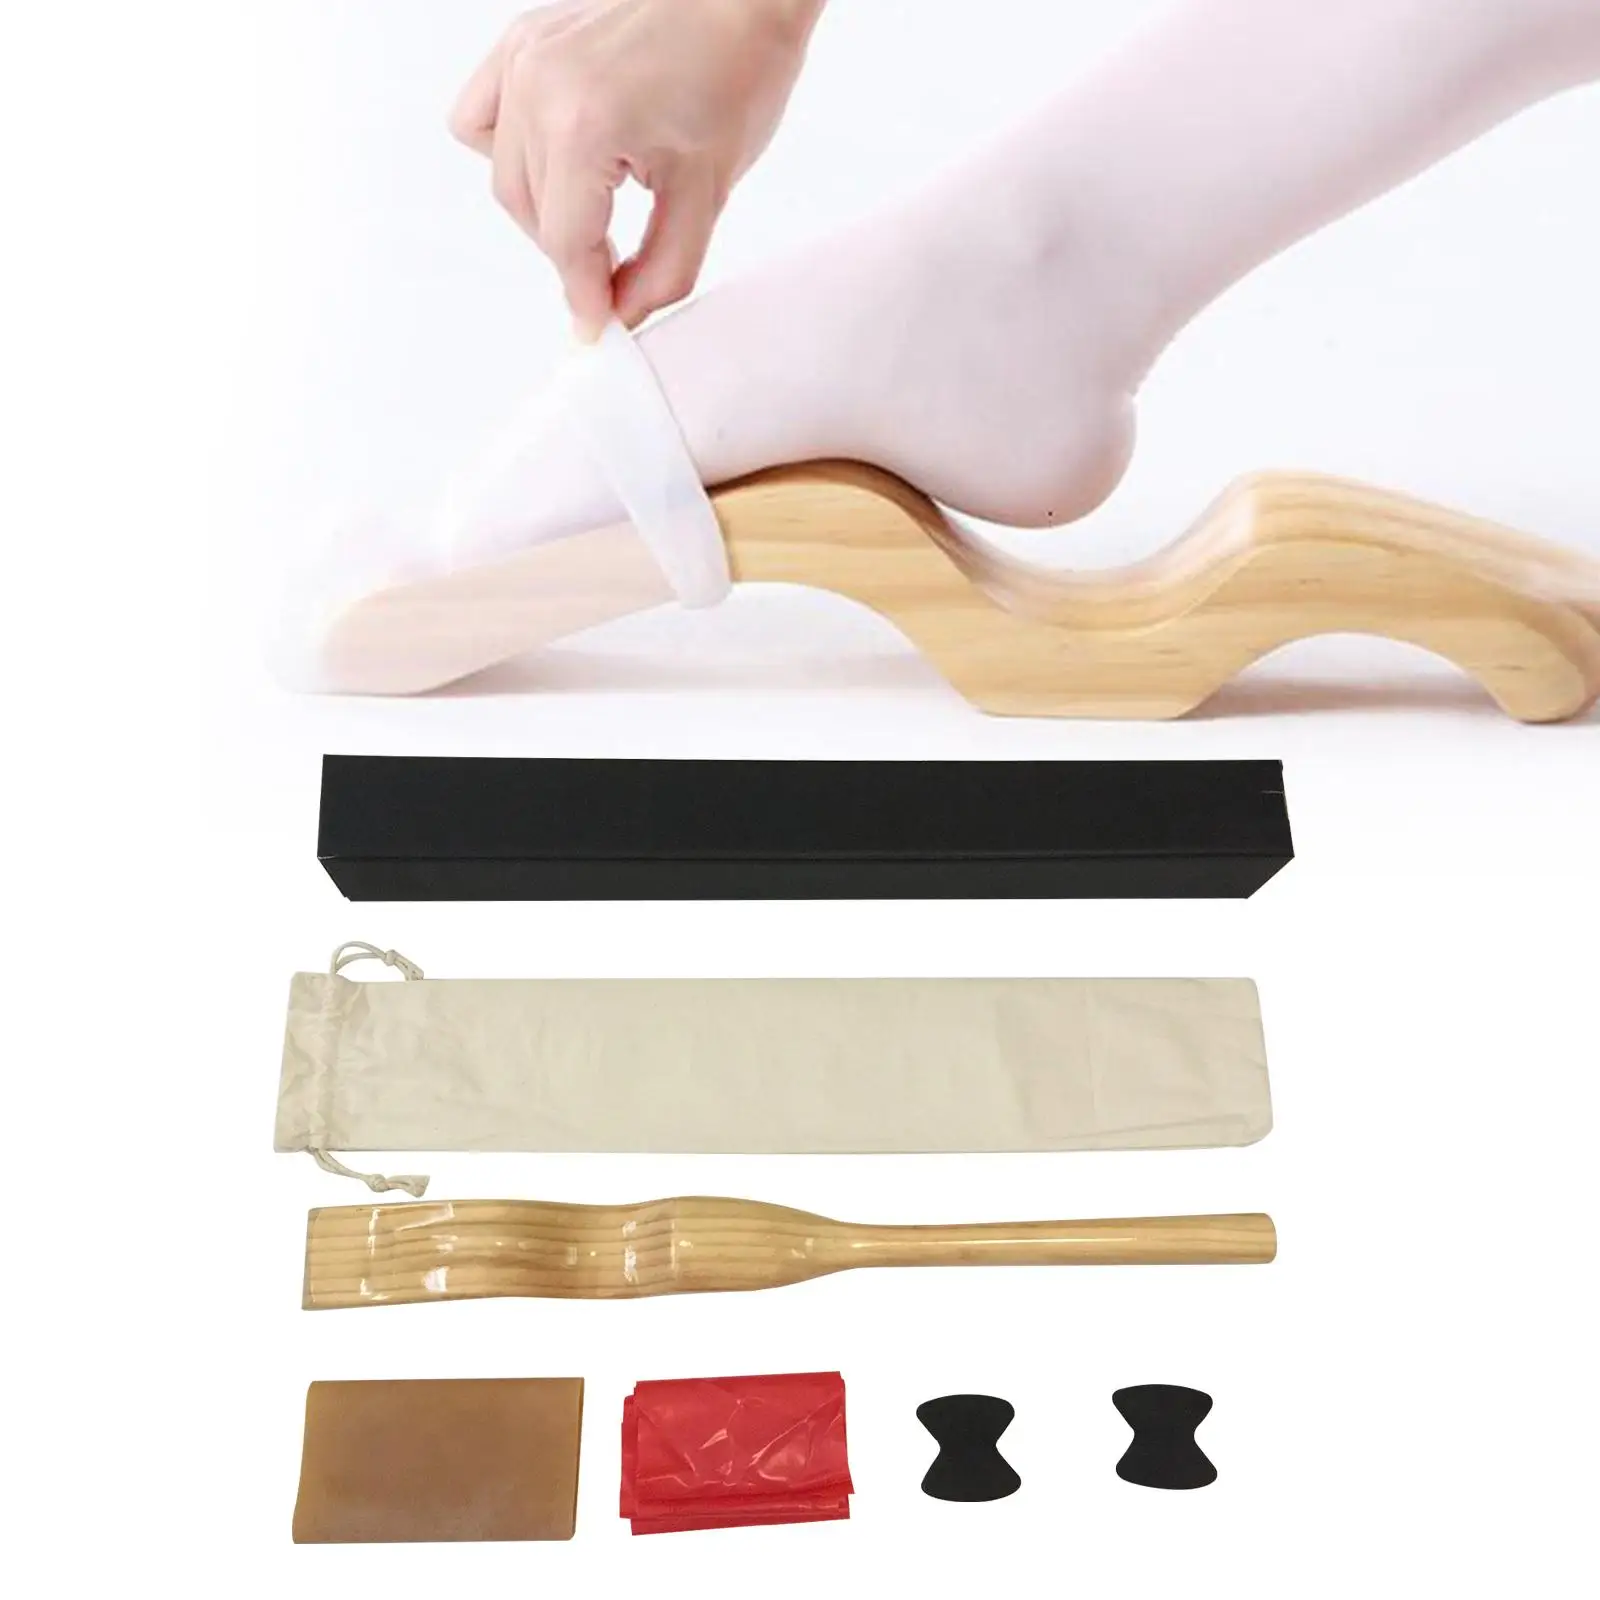 Ballet Foot Stretch Stretcher with Elastic Band Fitness Arch Enhancer for Home Ballet Dancers Pilates Yoga People Latin Tension